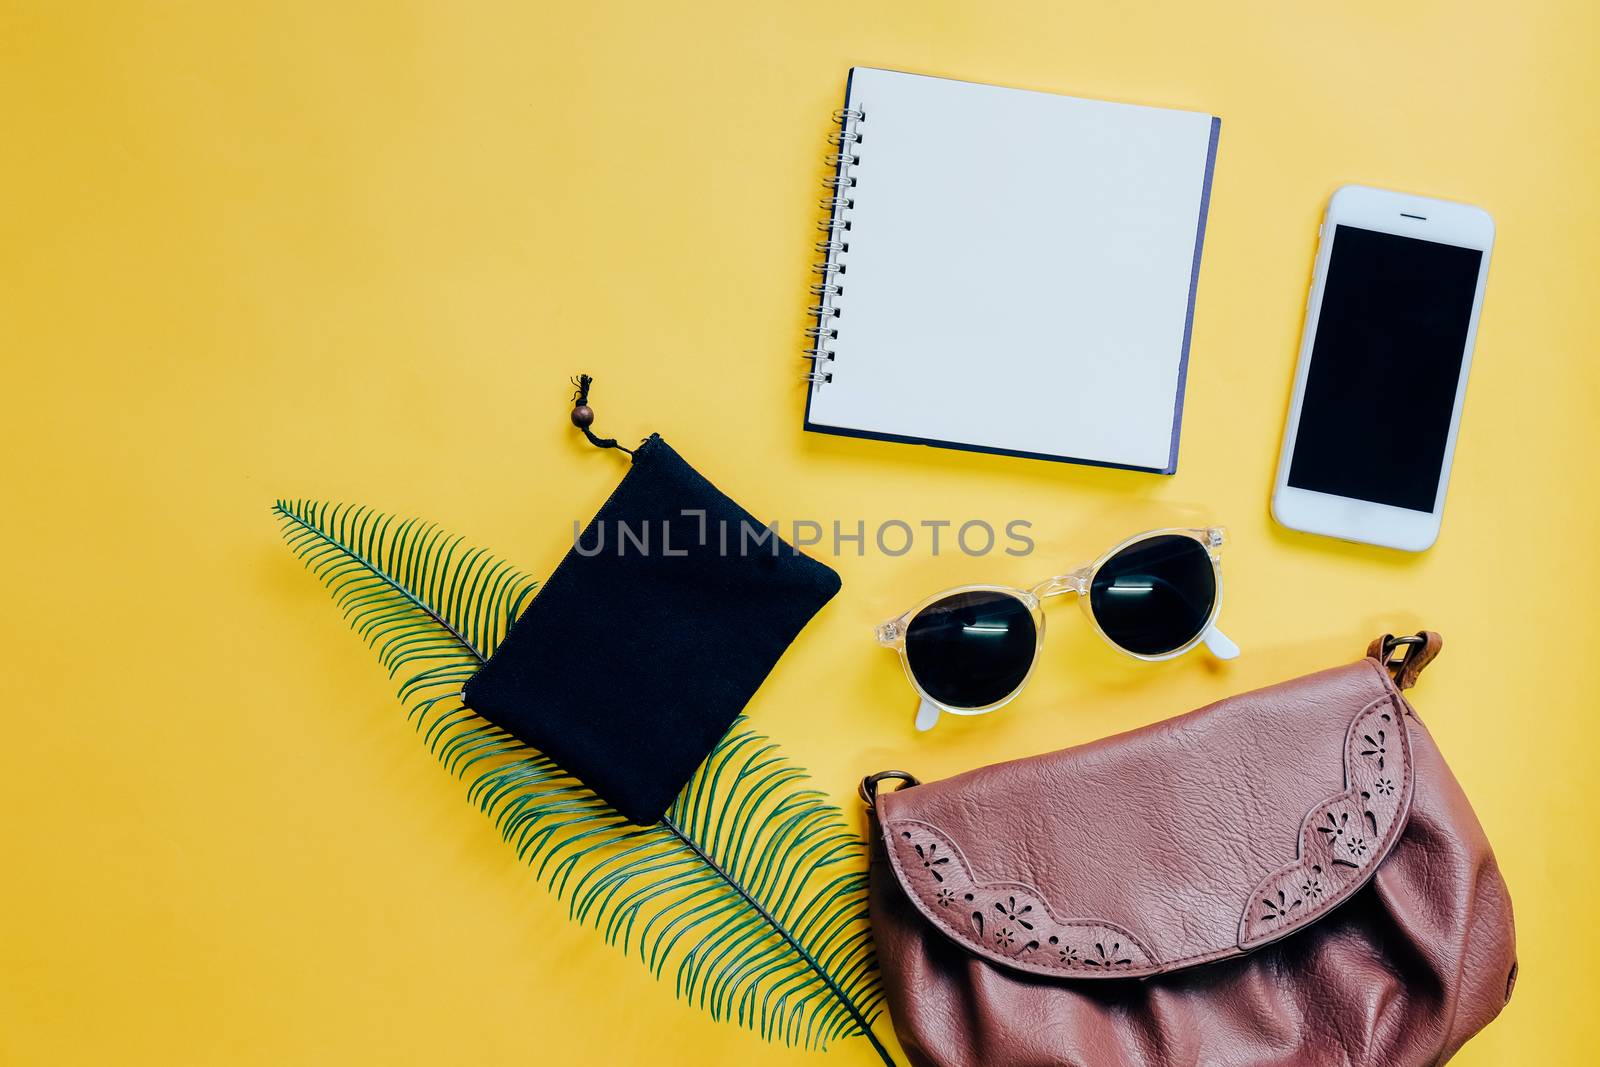 Top view flat lay of woman bag with smartphone, blank notebook, sunglasses and green leaf on yellow background, copy space